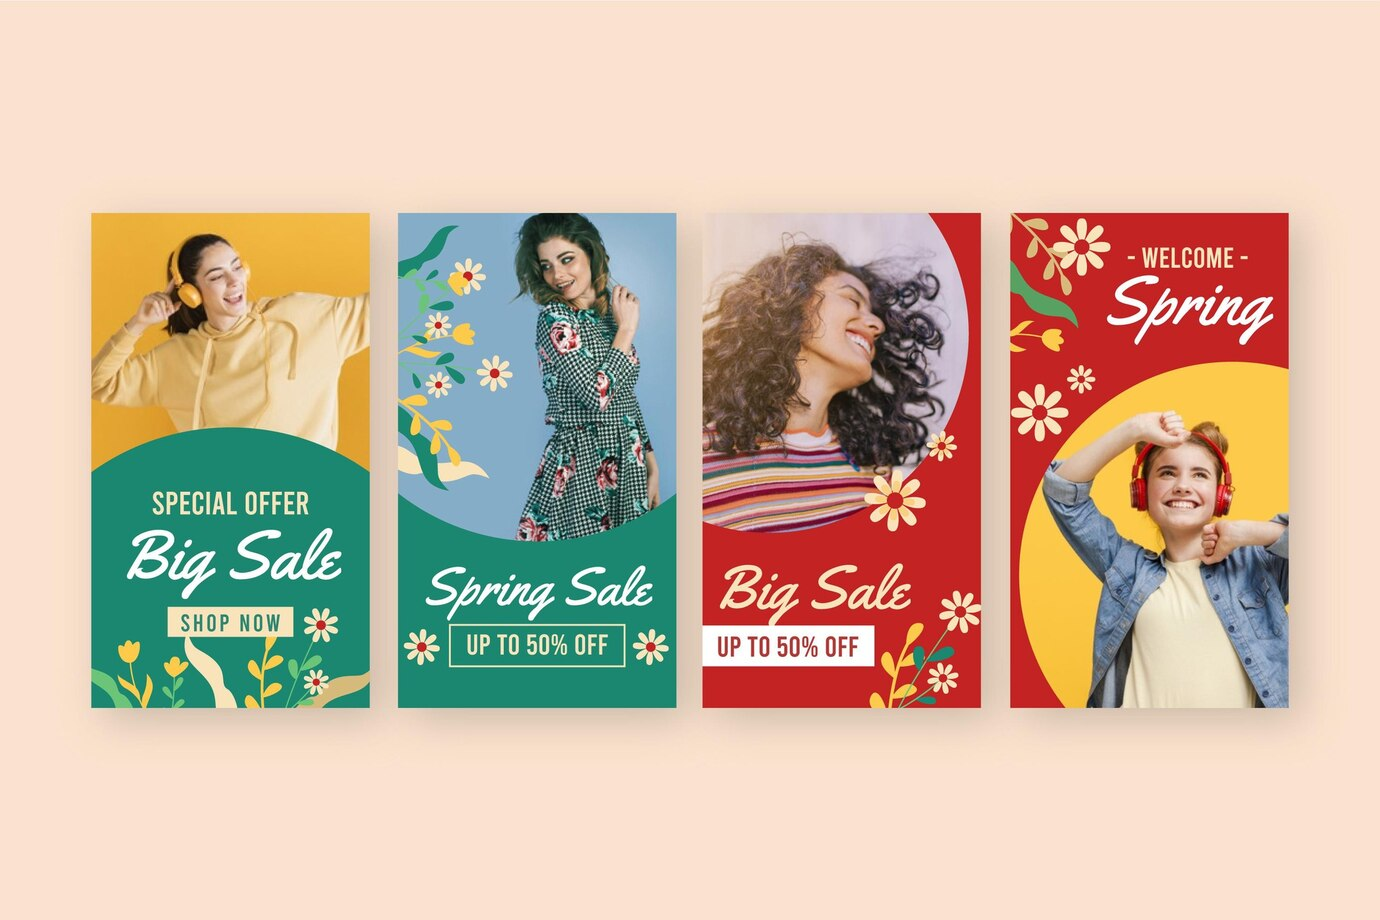 Align your Google Ads campaigns with seasonal trends